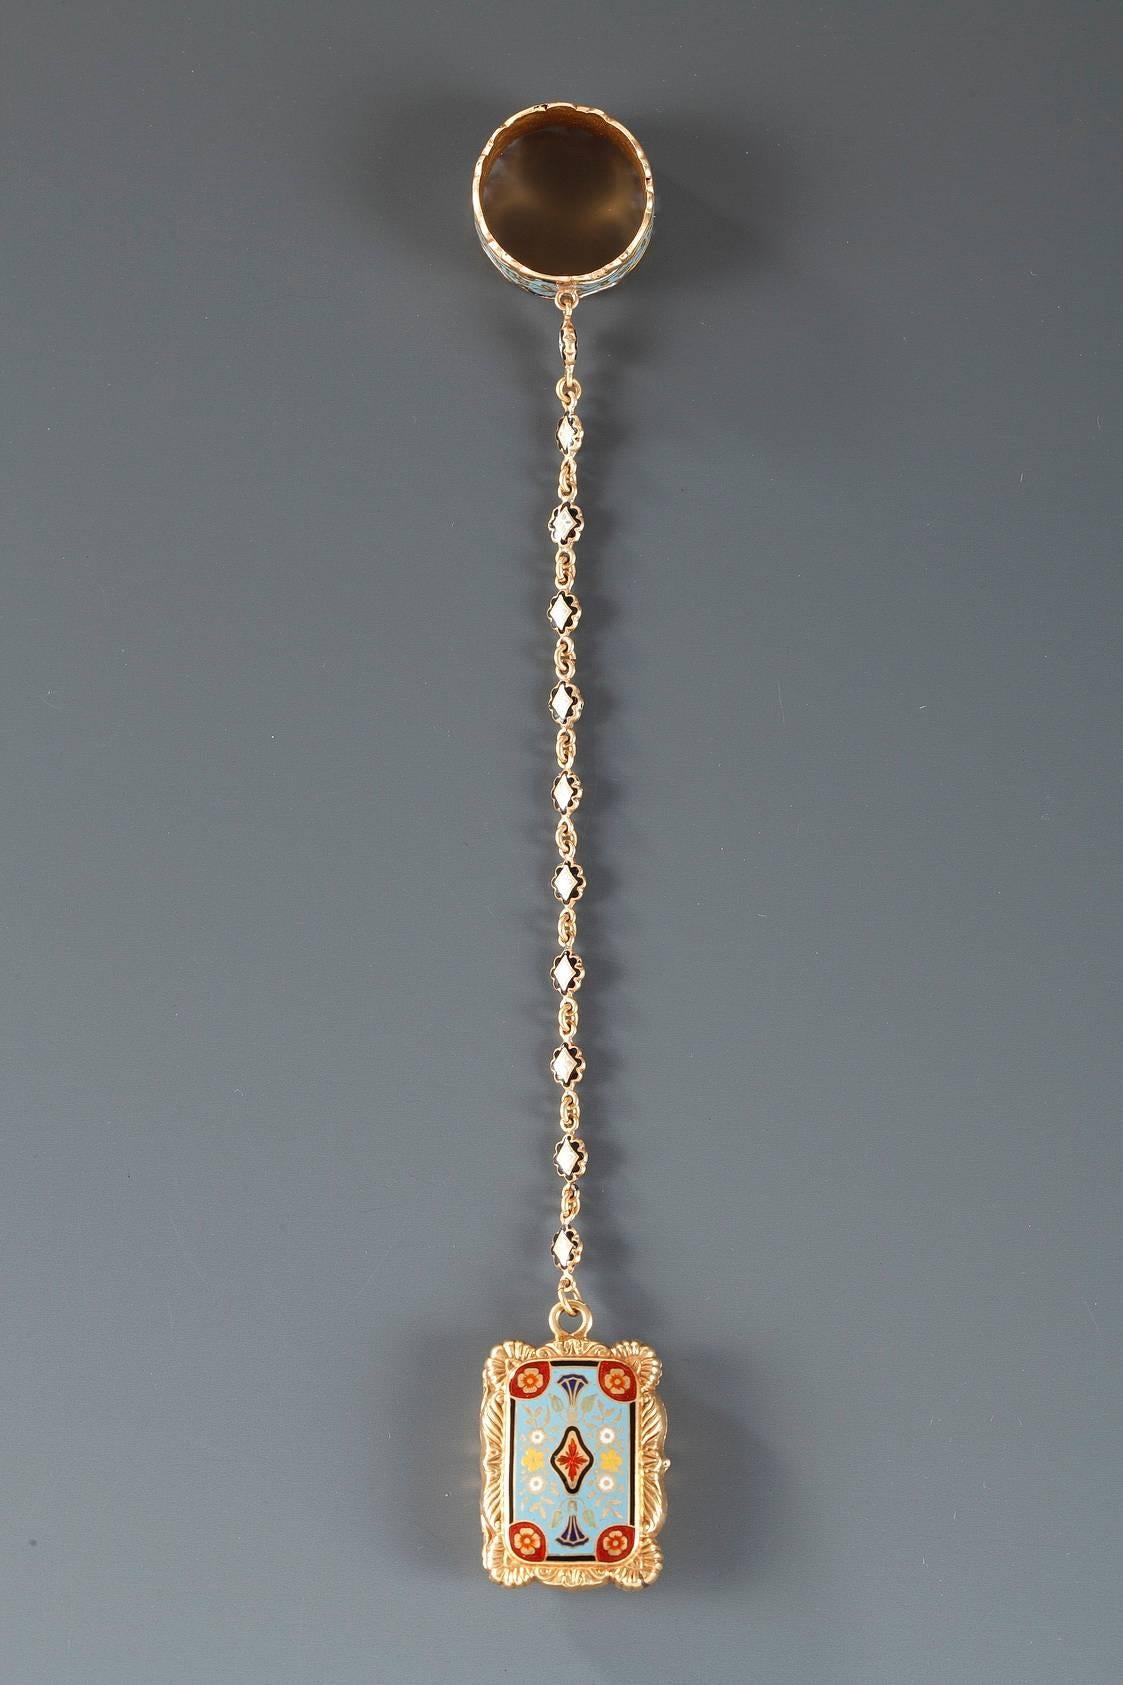 Nineteenth century vinaigrette in 18 karat gold, enameled on both sides with a brightly colored floral composition. A delicate chain connects the vinaigrette to an elegantly enameled ring, highlighted with scroll work and golden floral motifs. The